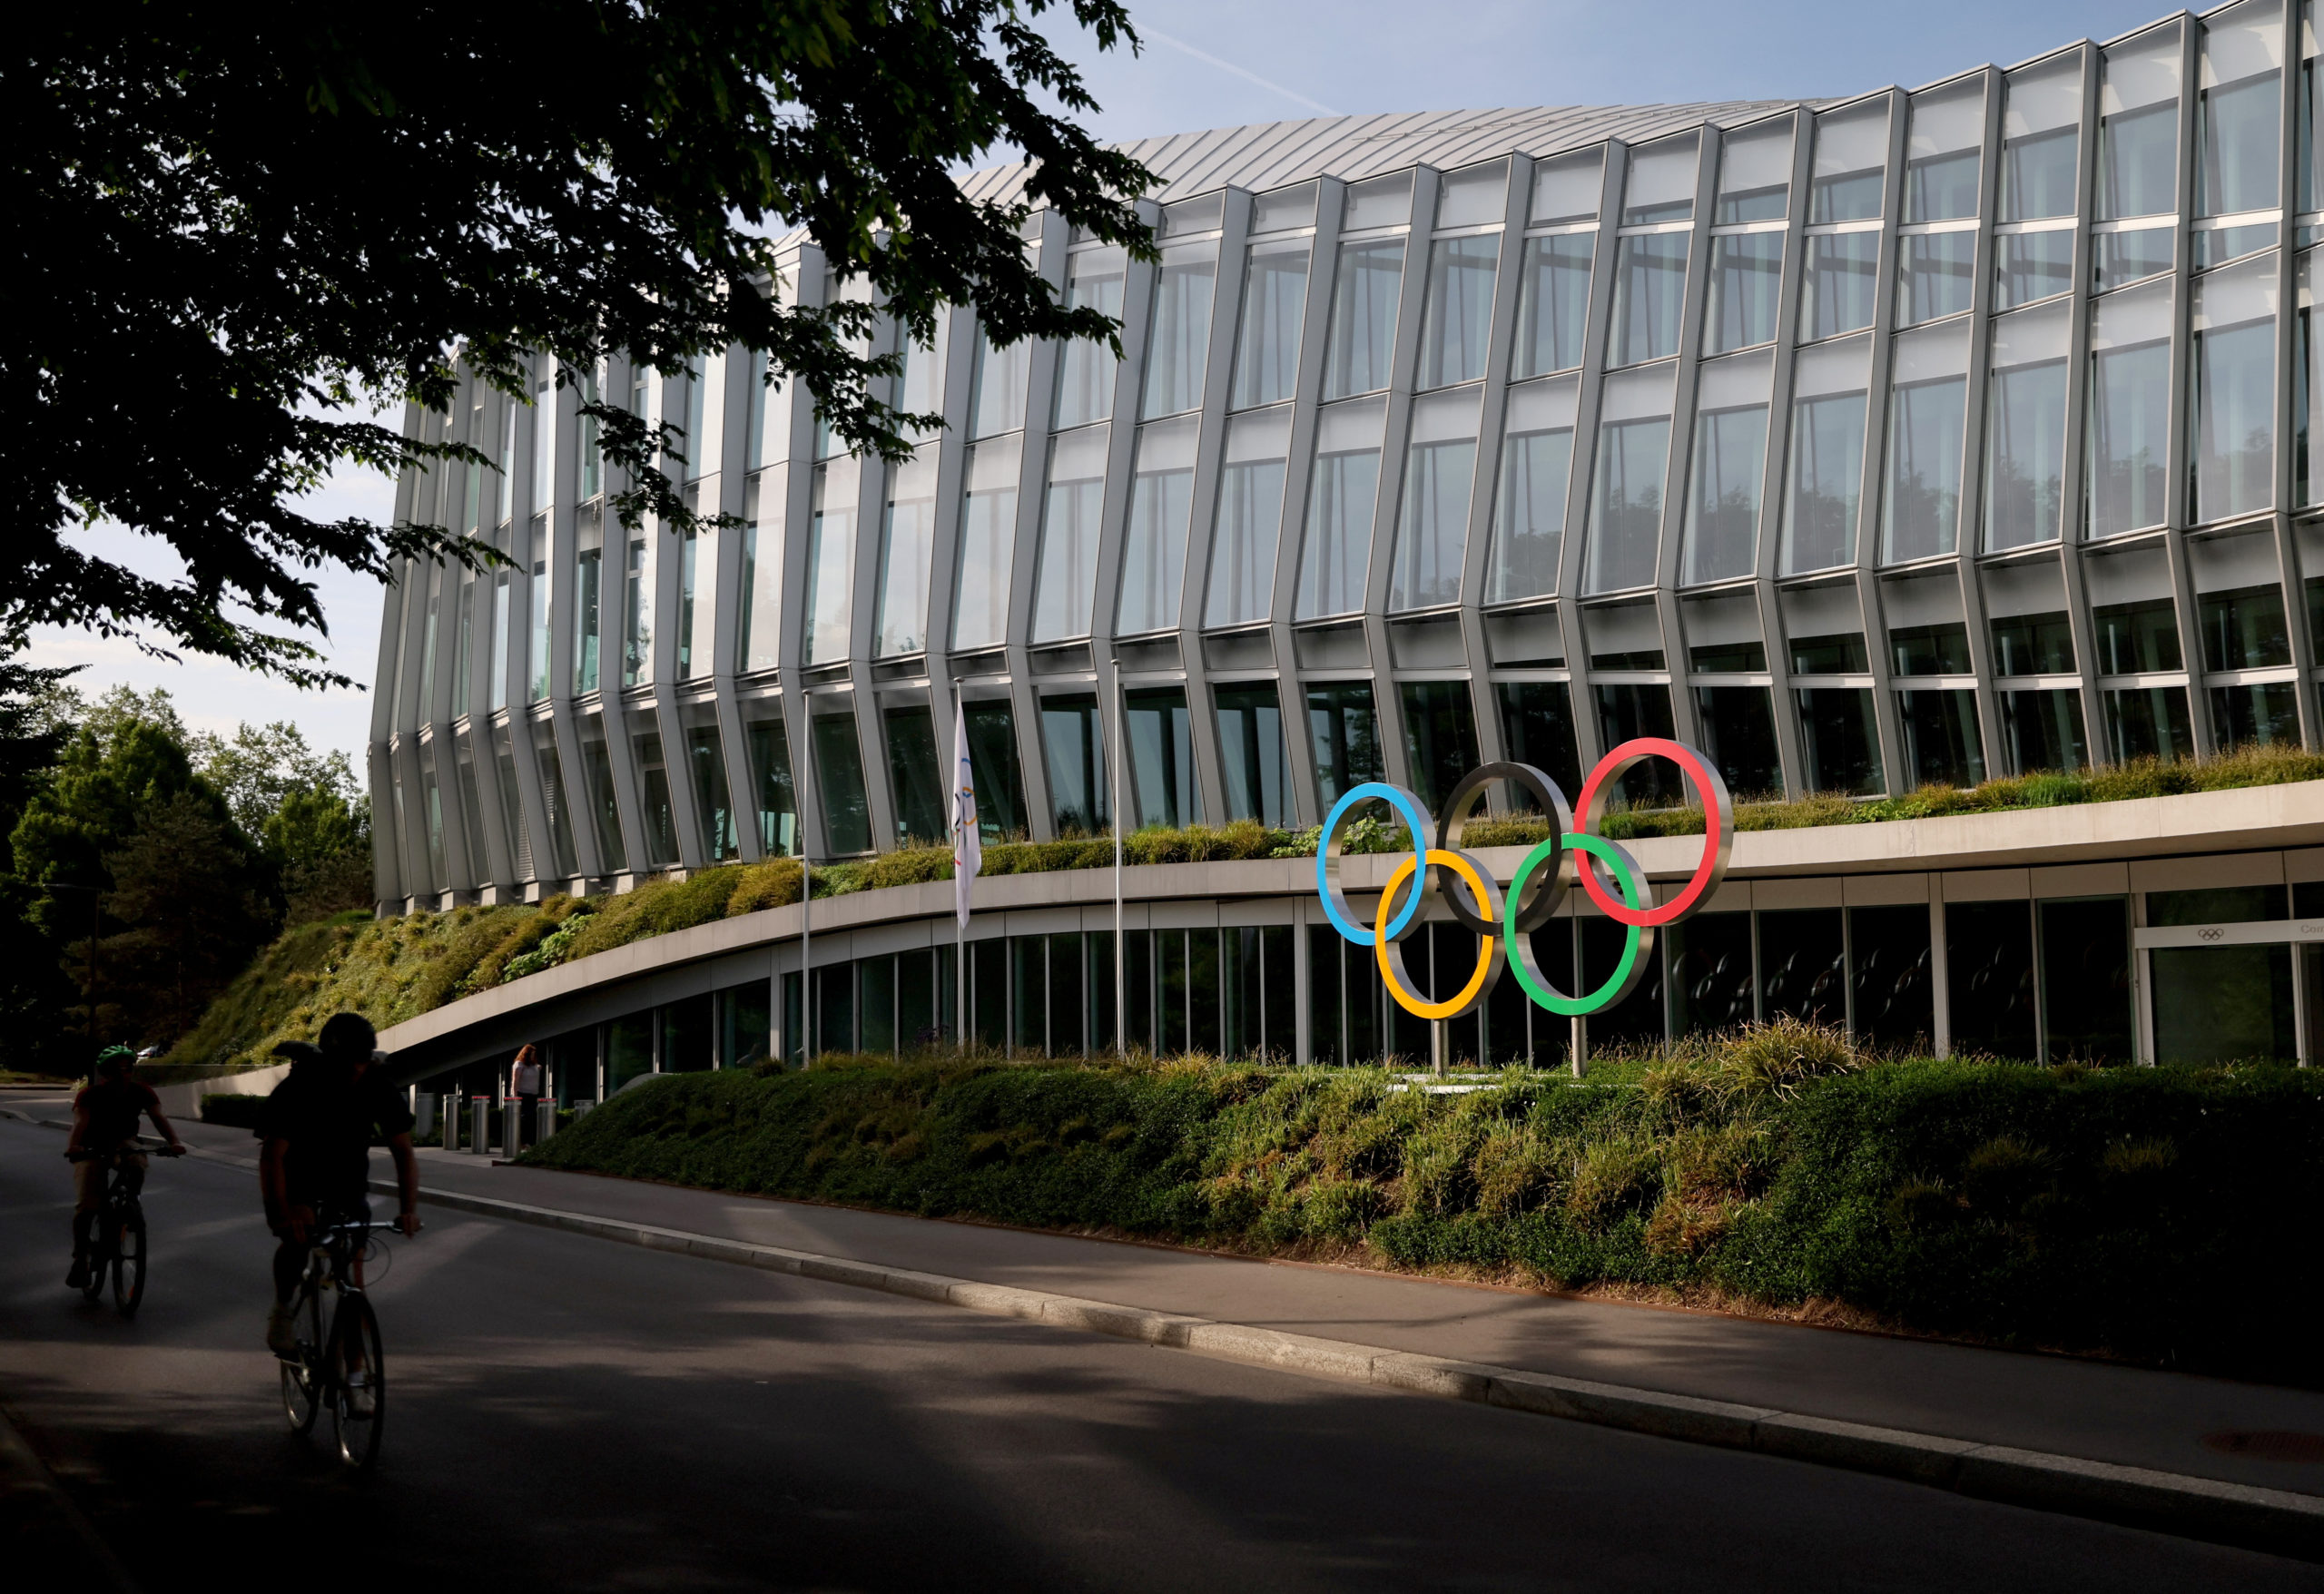 The Olympic rings are pictured in front of the International Olympic Committee (IOC) headquarters in Lausanne, Switzerland, May 17, 2022. REUTERS/Denis Balibouse